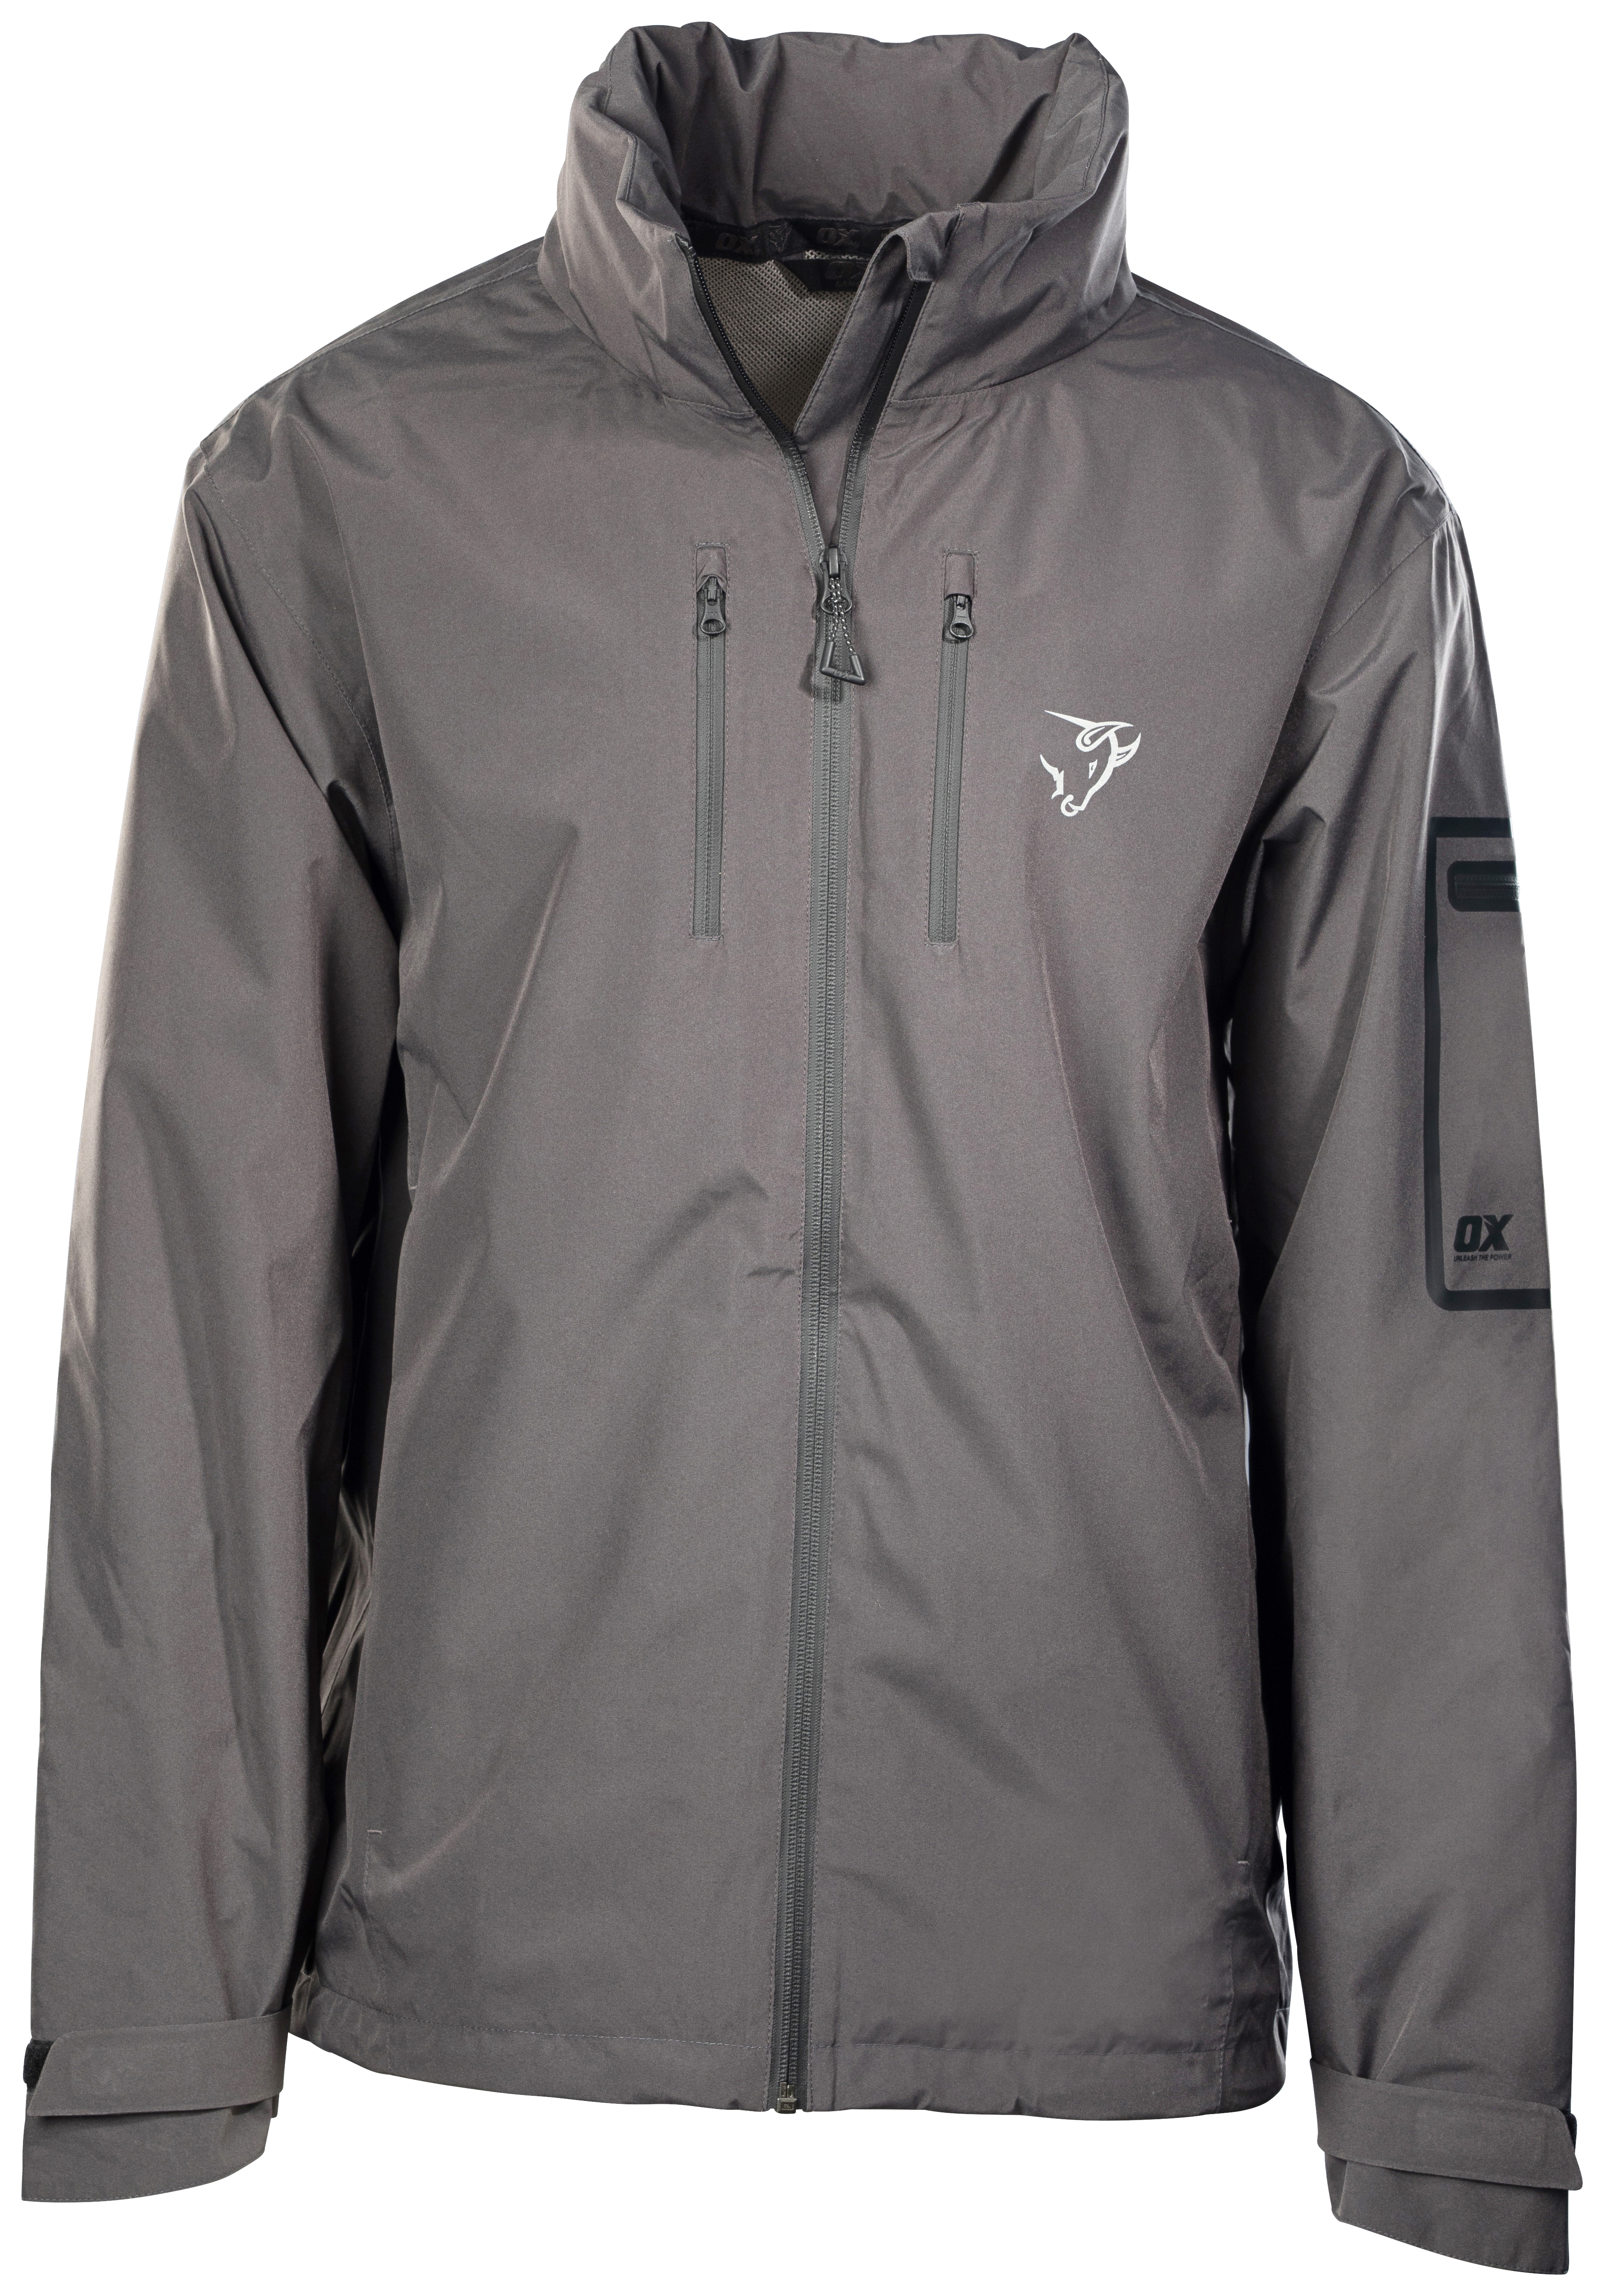 Image of OX Packable Jacket, in Grey Lightweight, Size: L